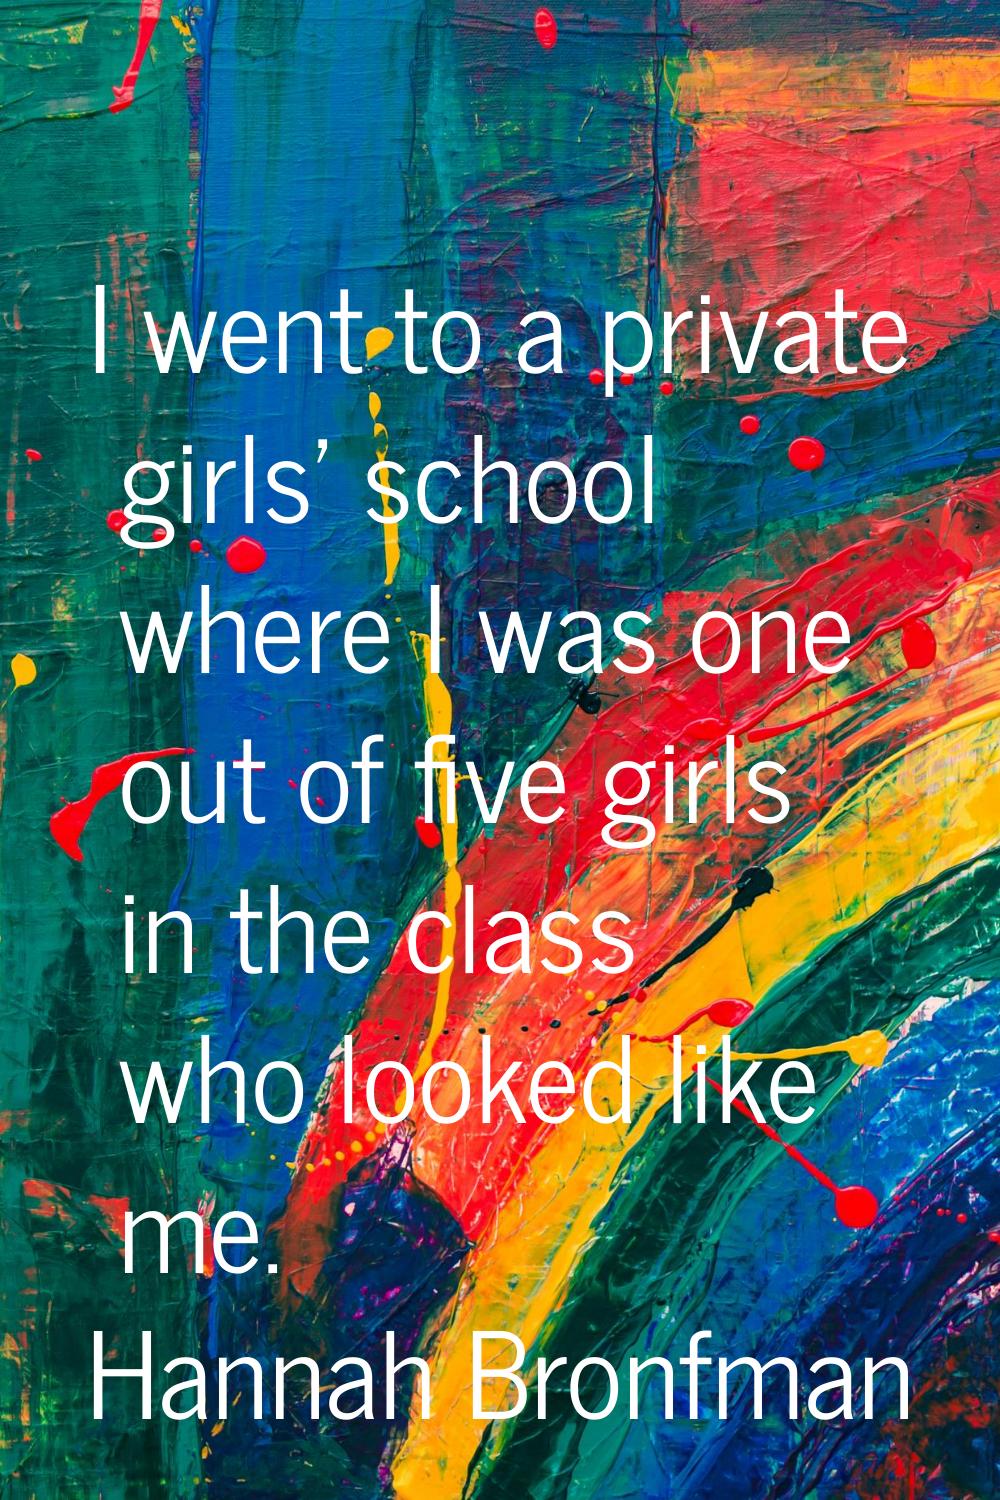 I went to a private girls' school where I was one out of five girls in the class who looked like me